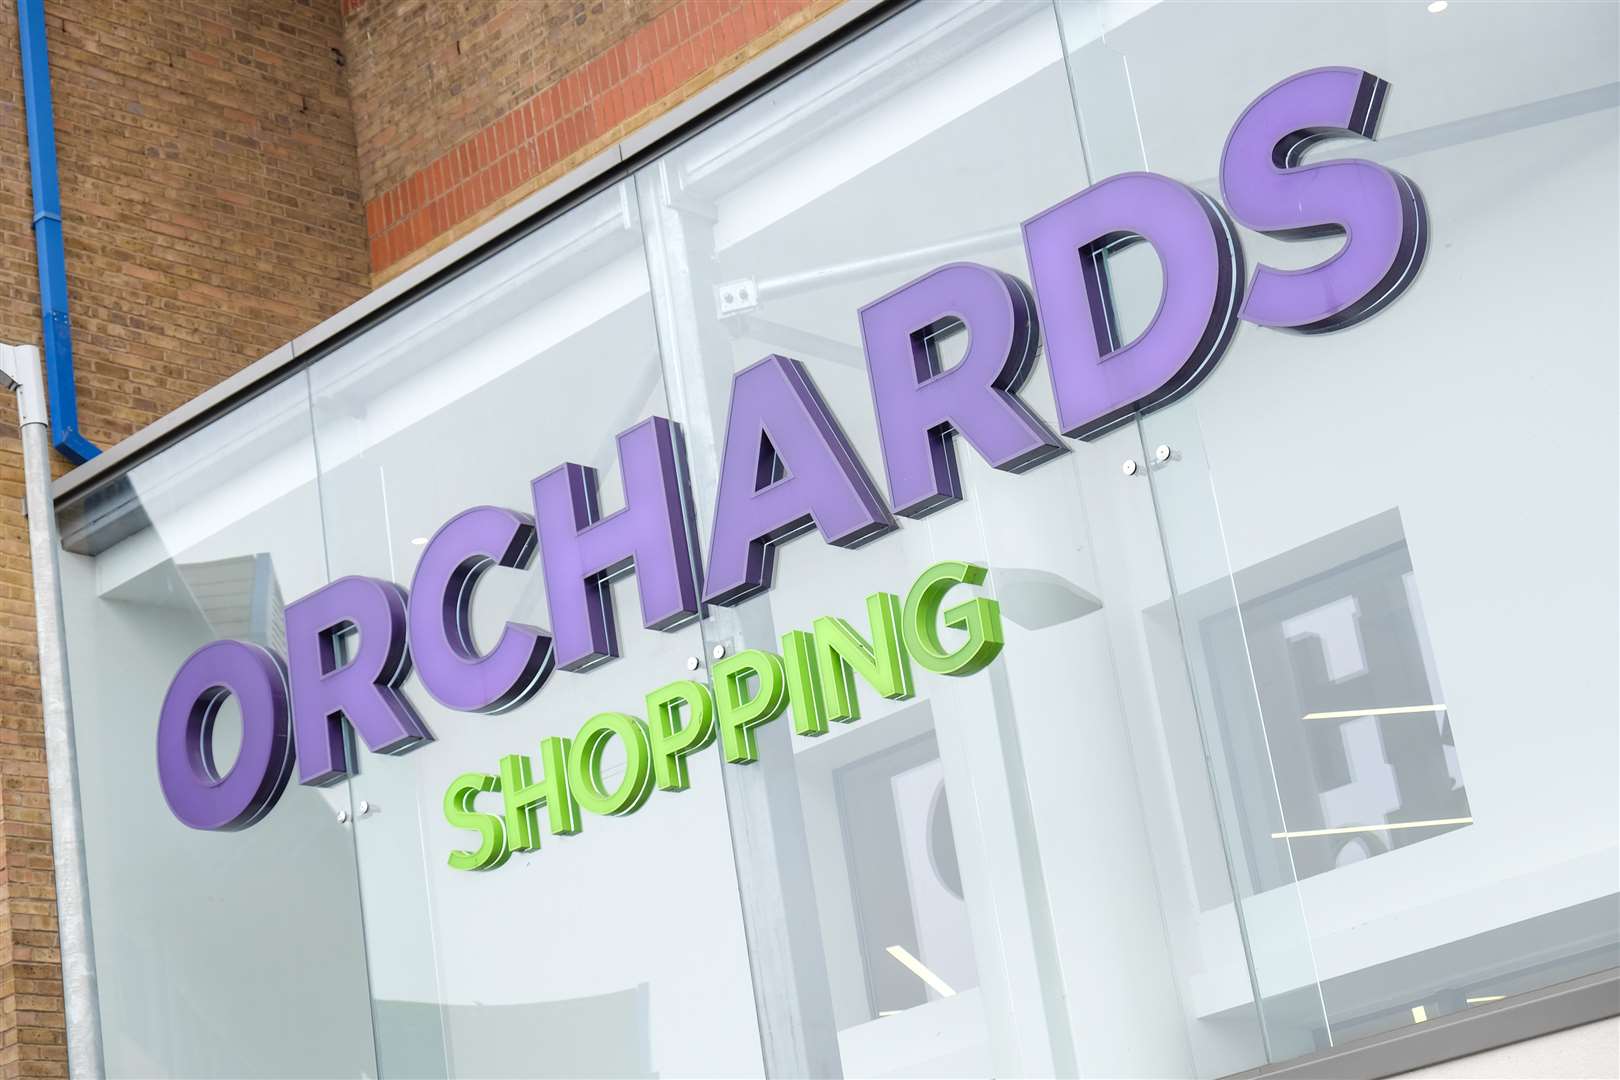 Orchards Shopping Centre.